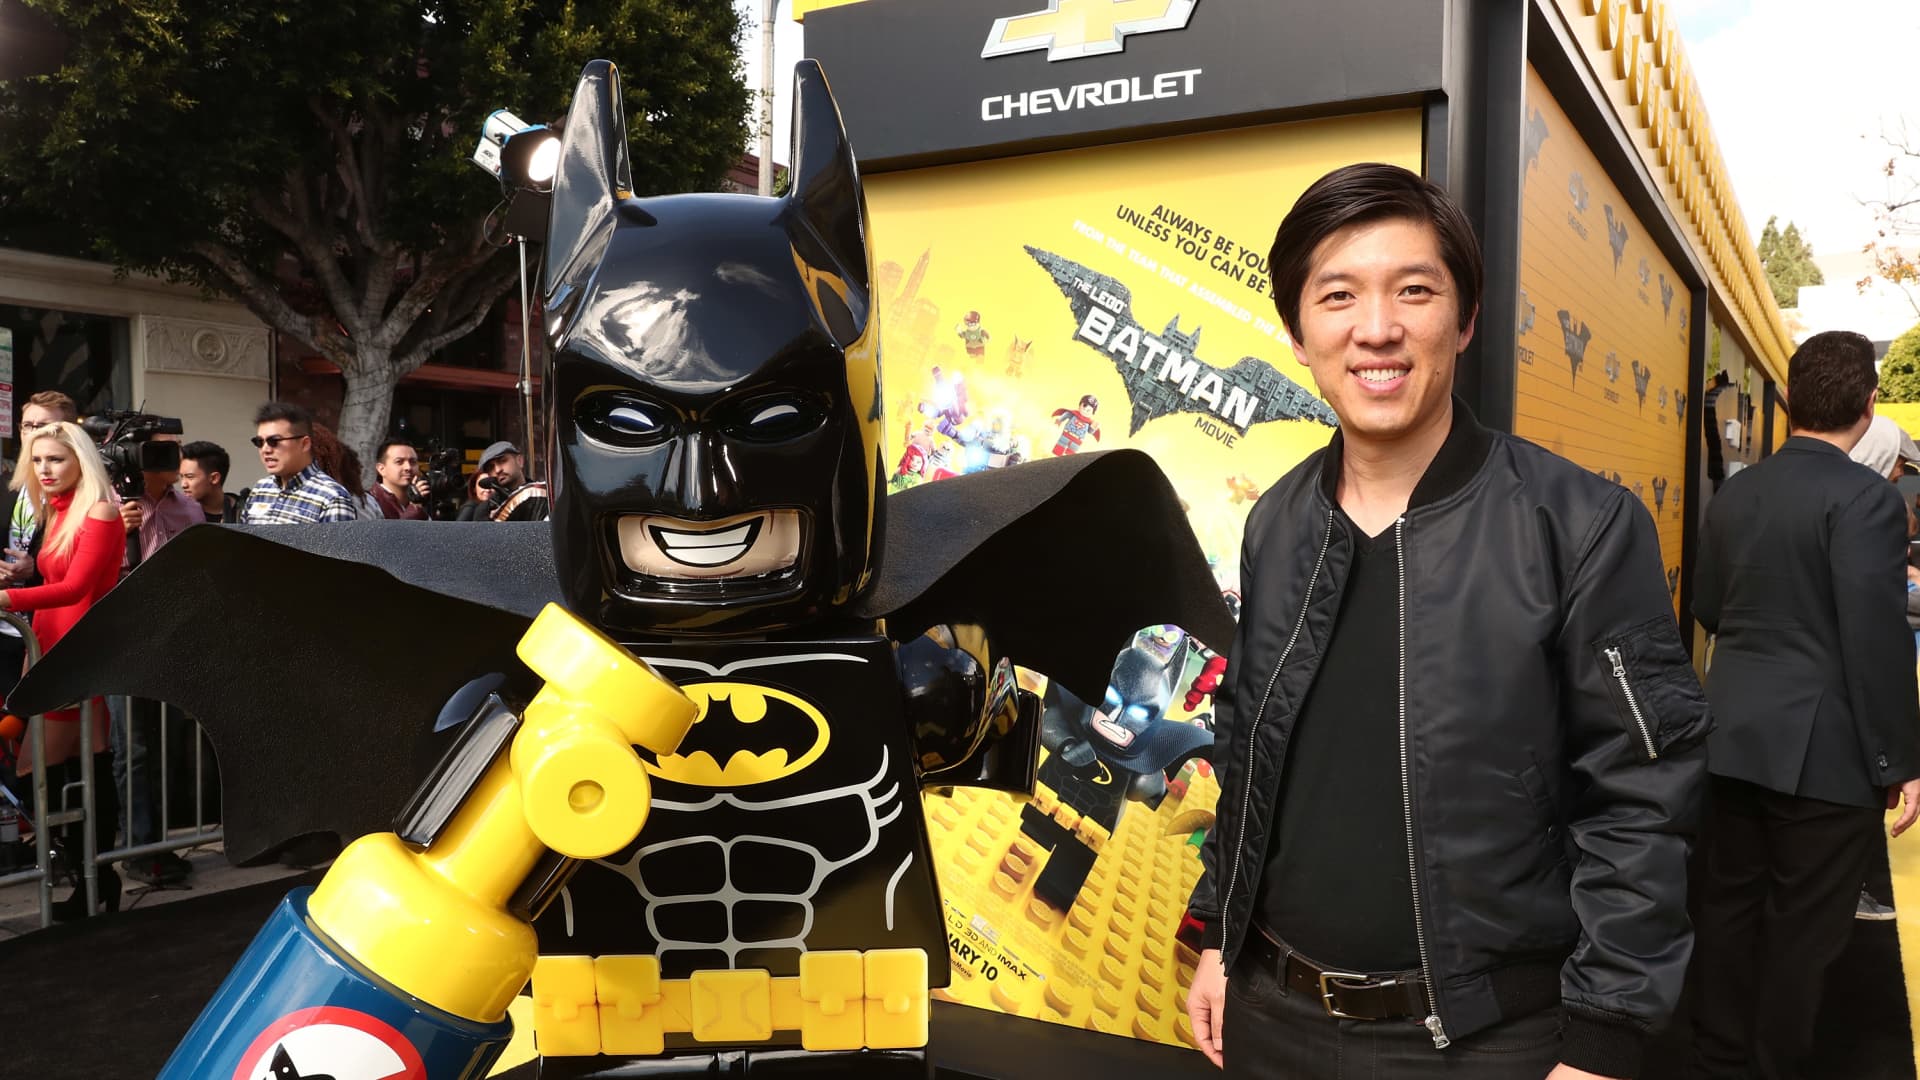 Dan Lin won’t take DC film and TV boss role at Warner Bros. Discovery